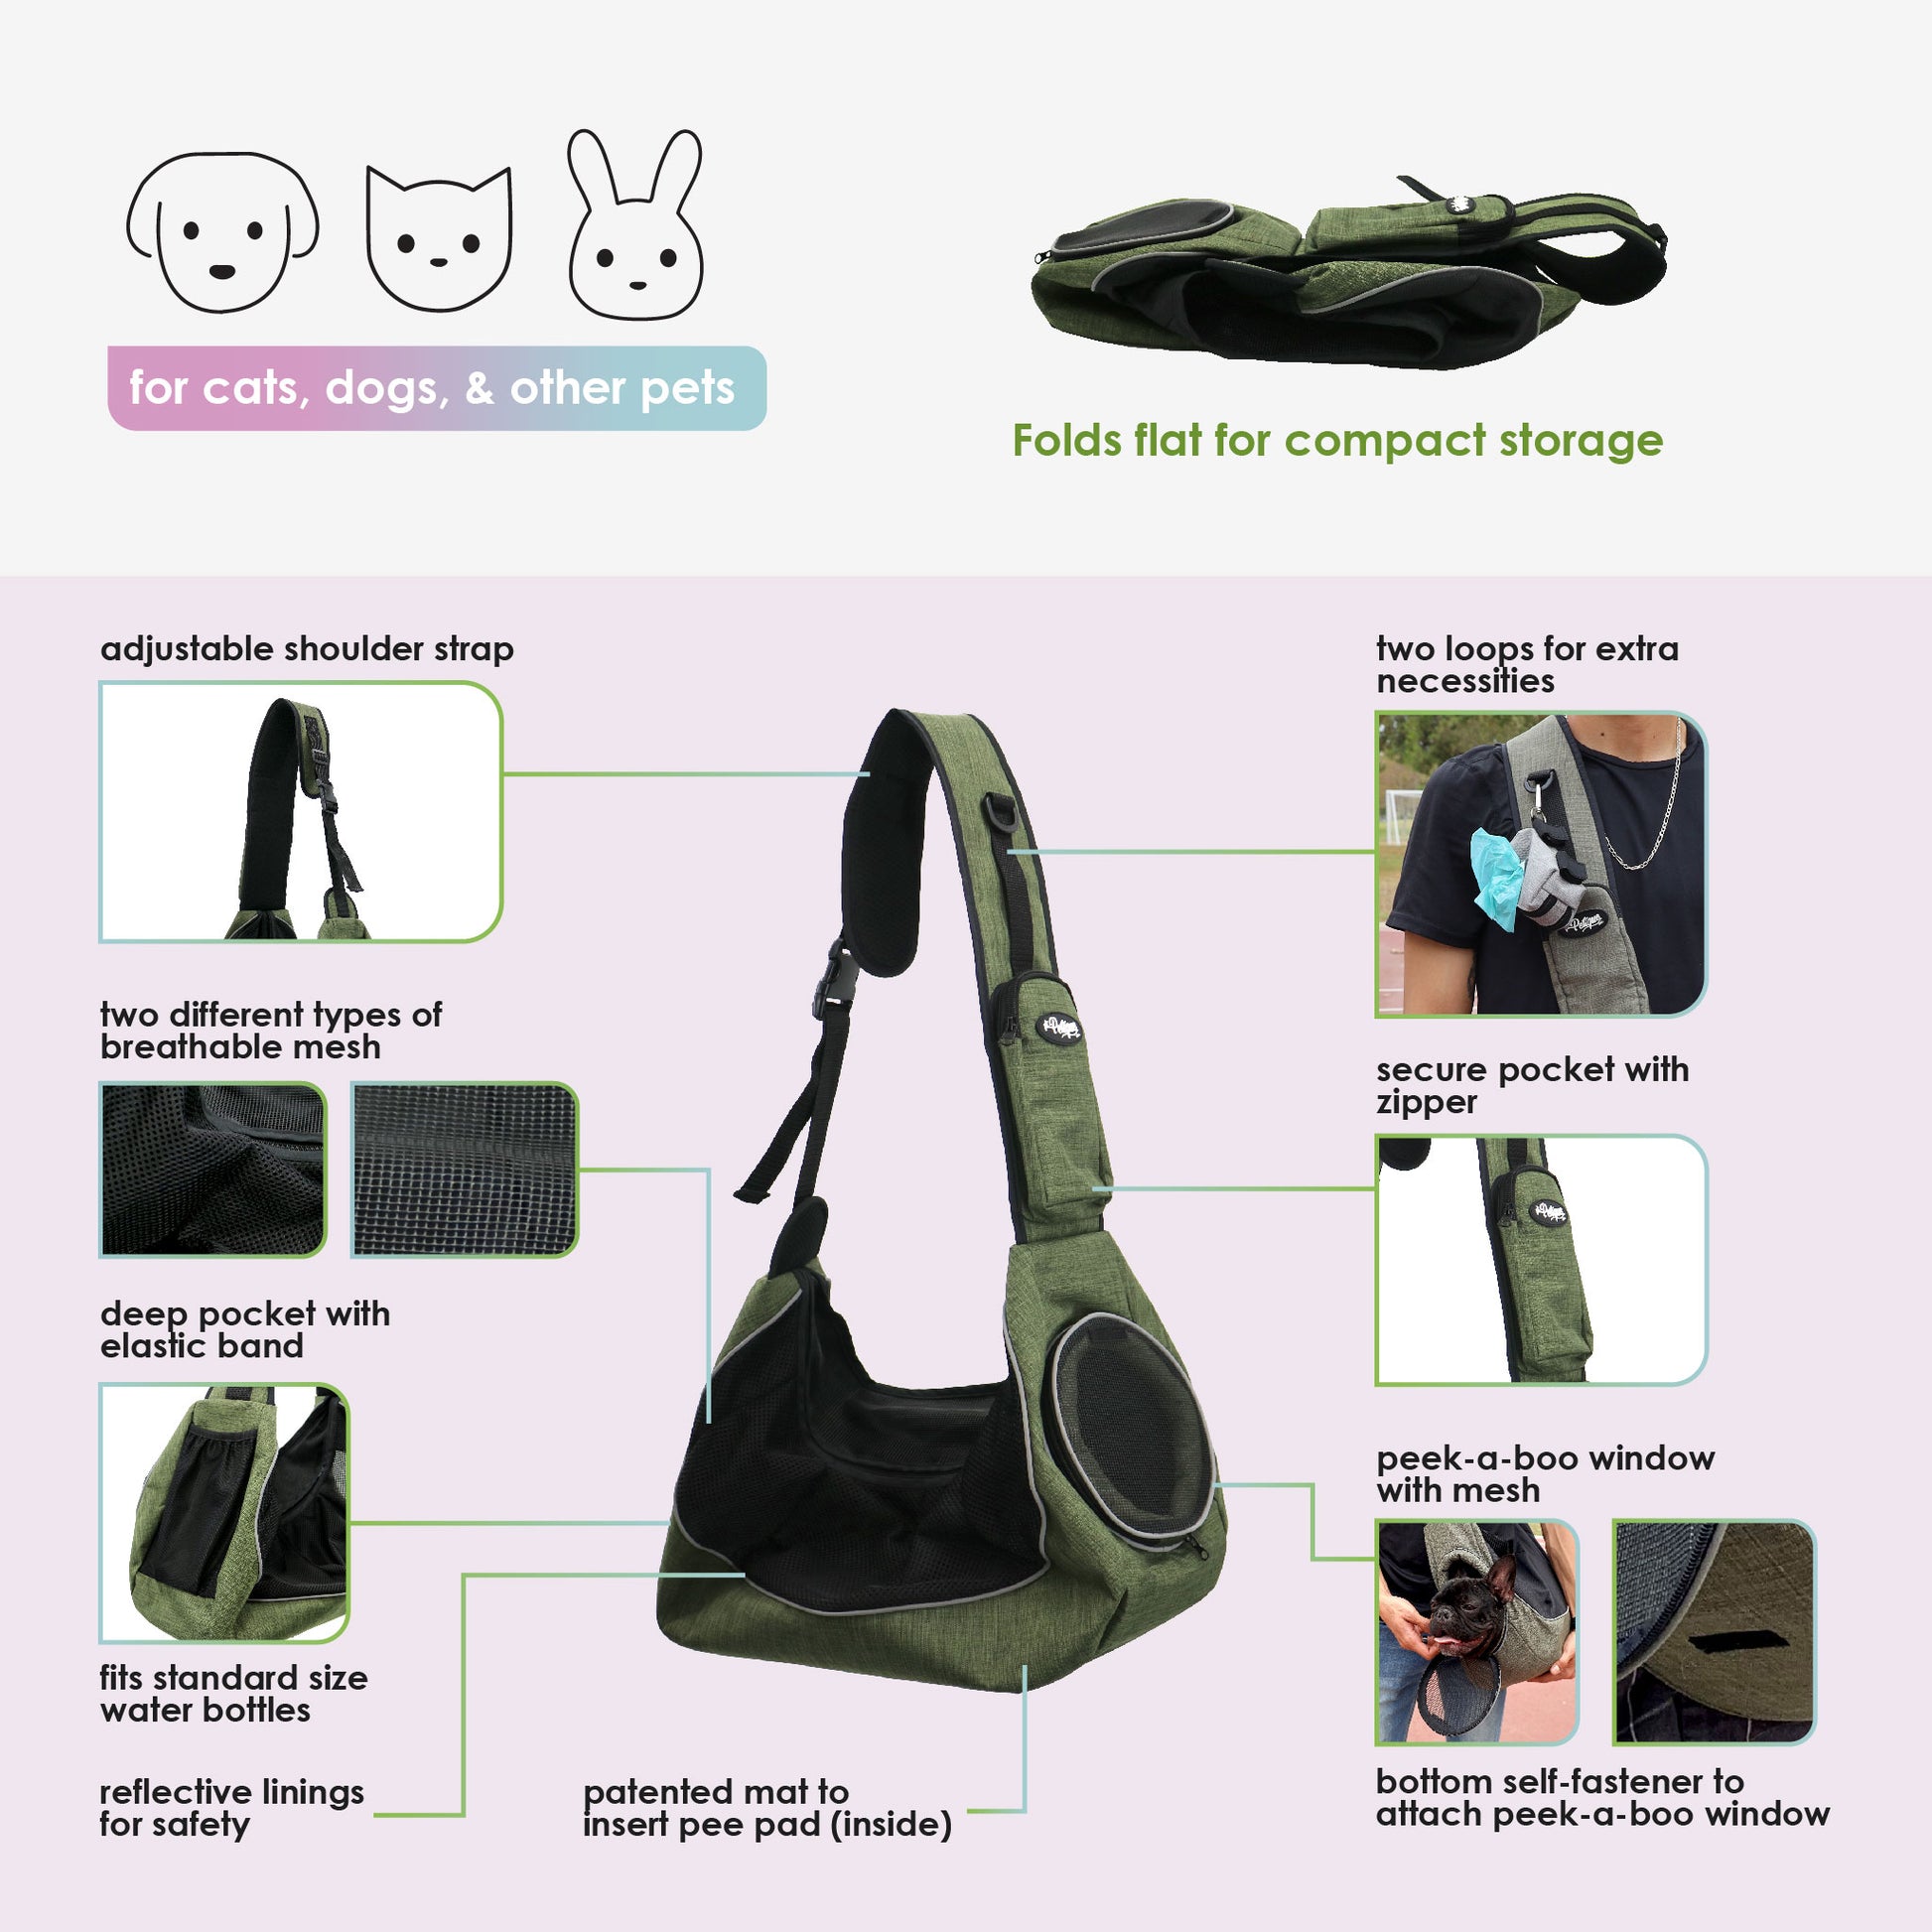 sling pet carrier features